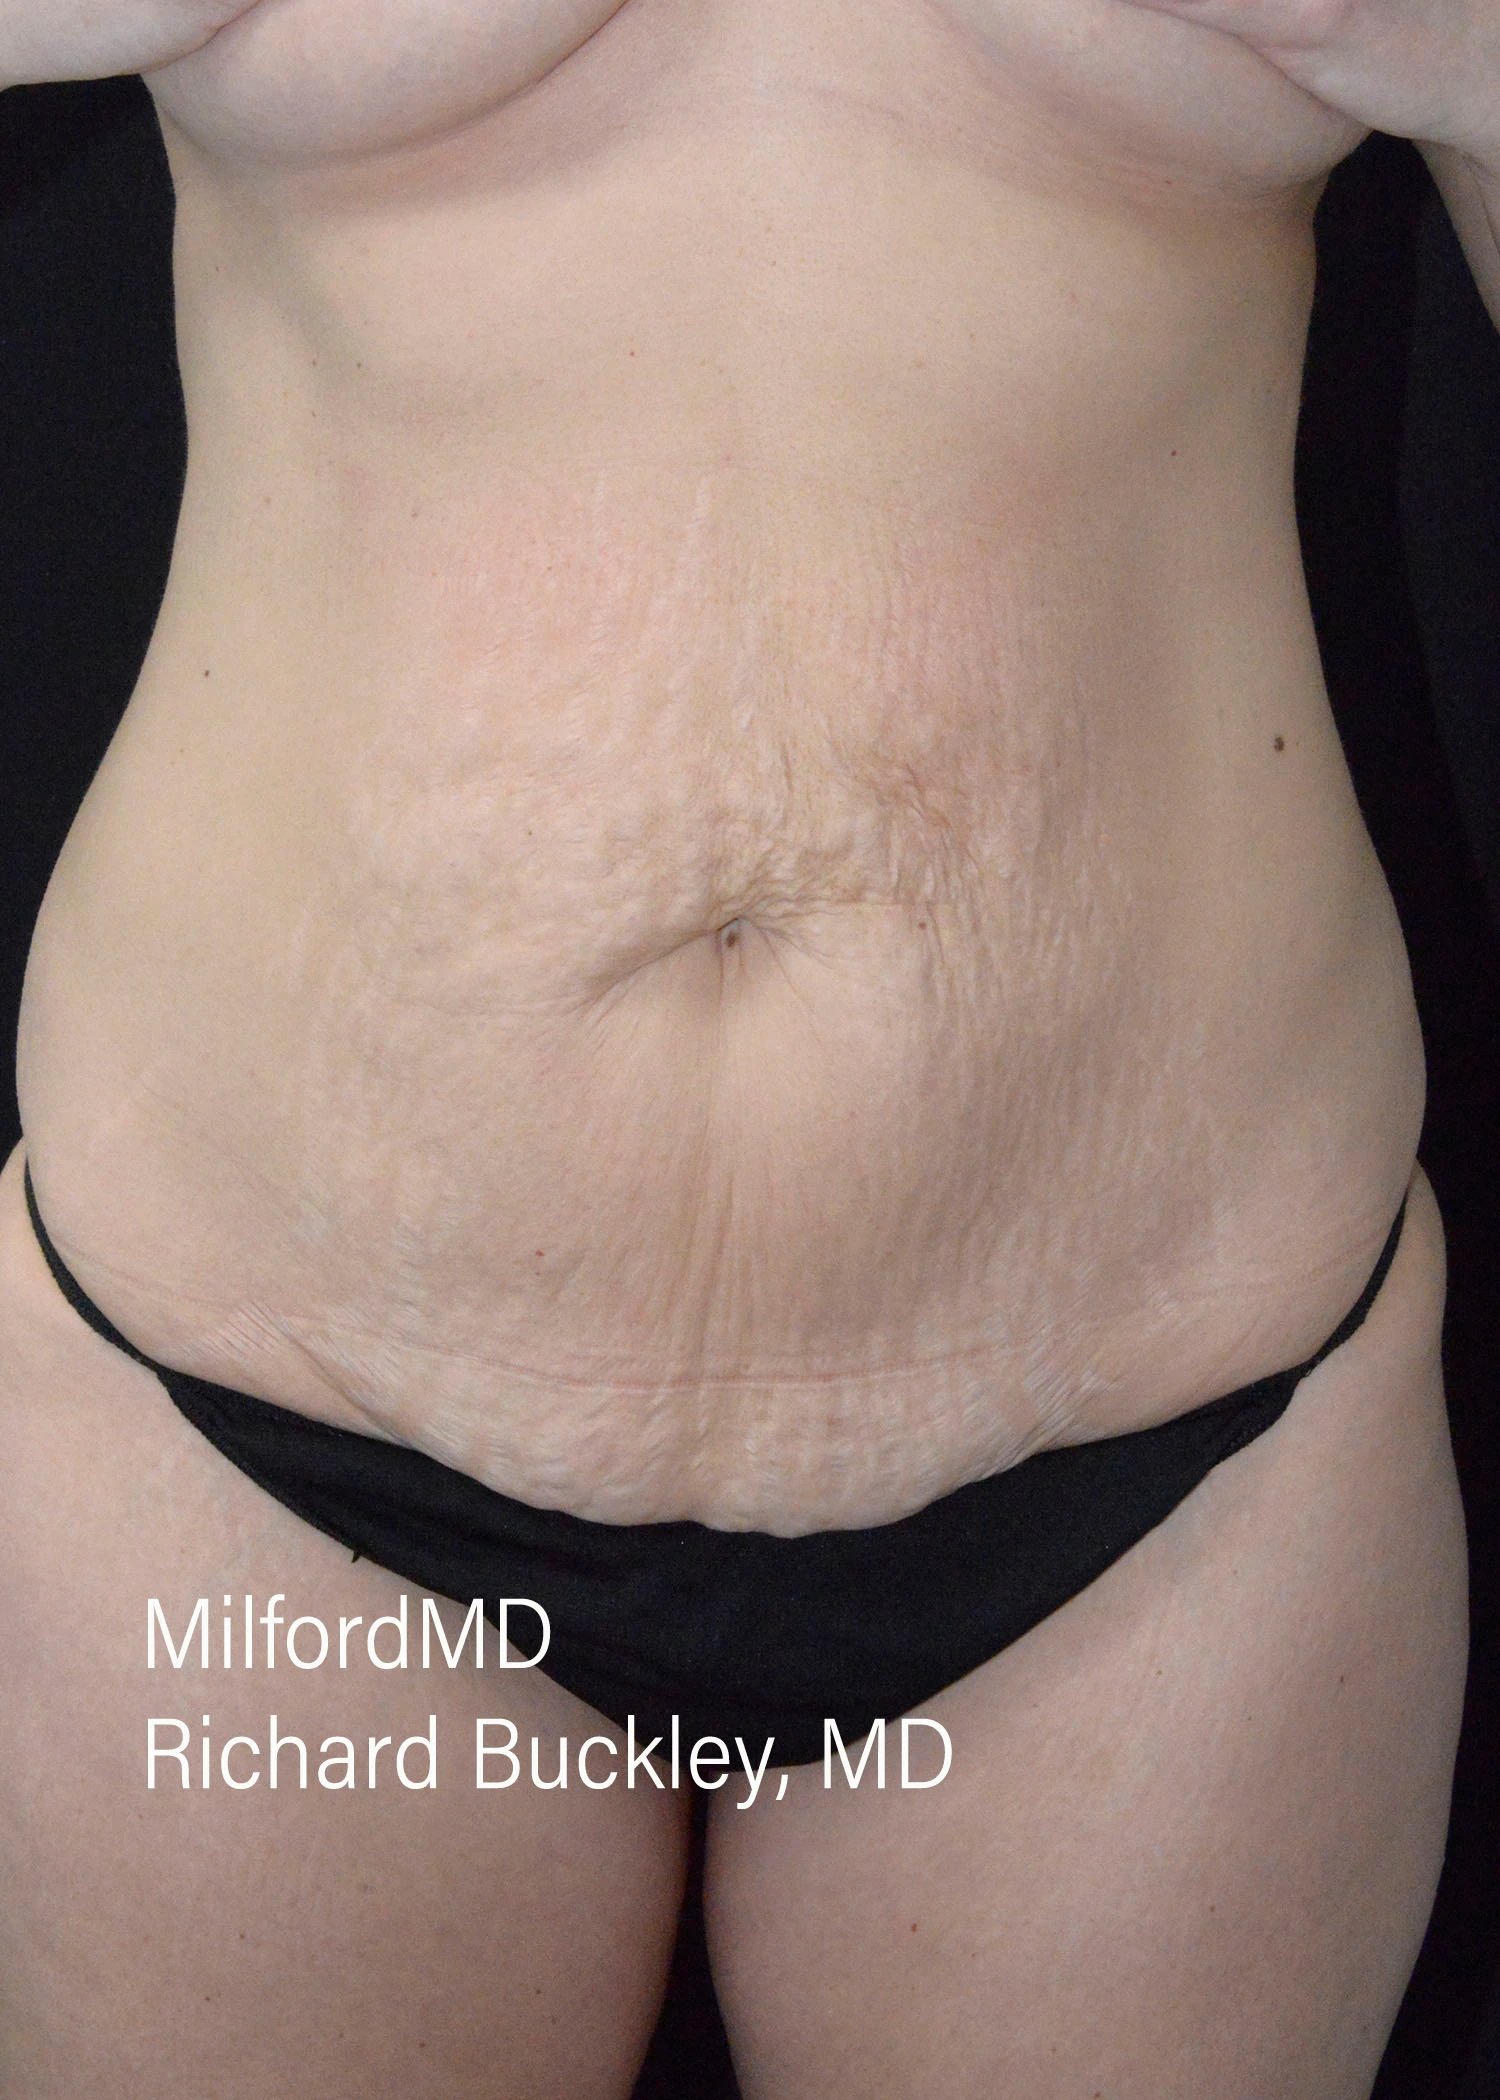 Reverse Abdominoplasty Before And After Photos